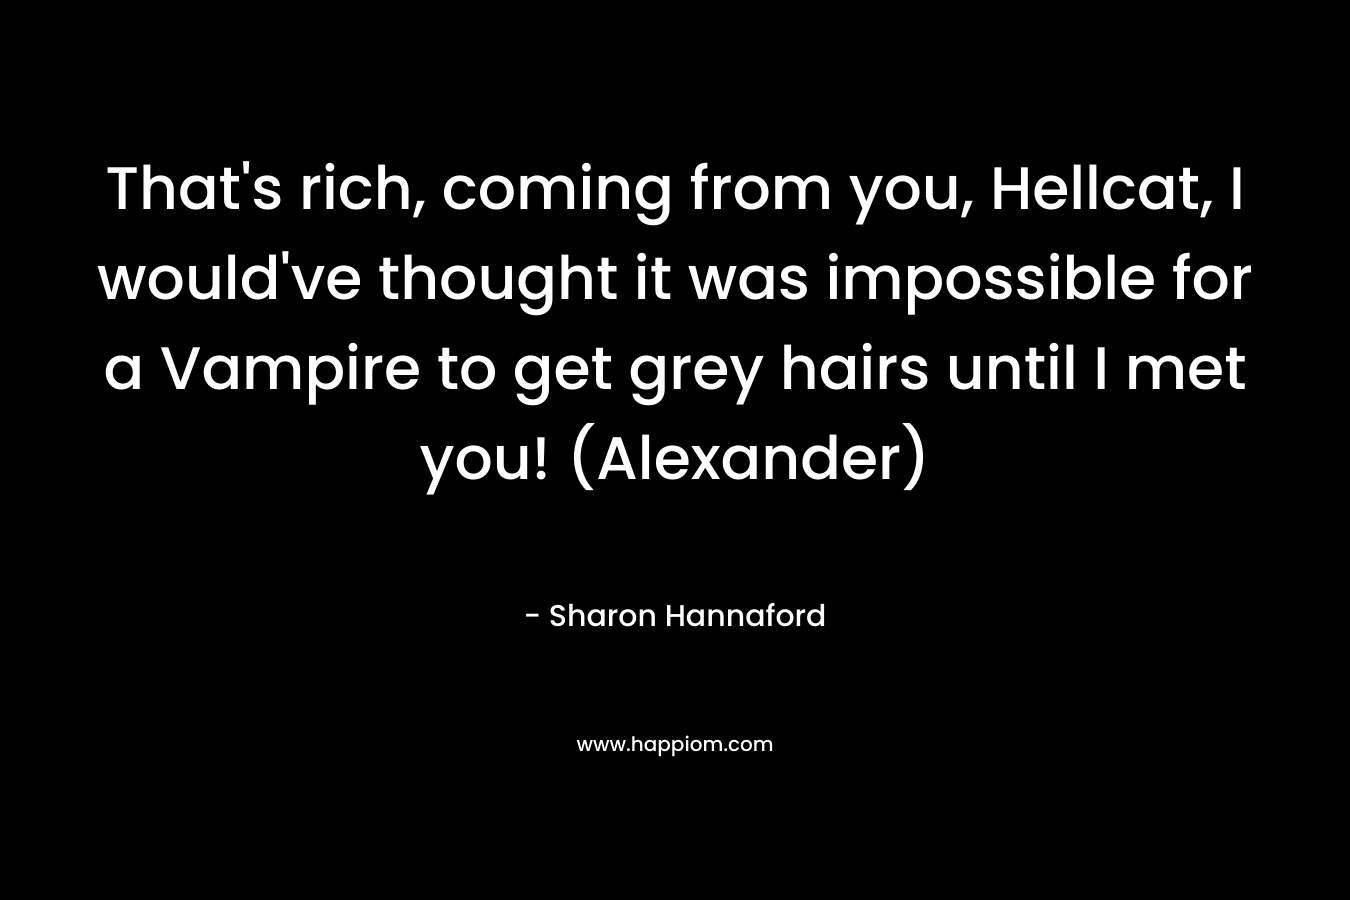 That’s rich, coming from you, Hellcat, I would’ve thought it was impossible for a Vampire to get grey hairs until I met you! (Alexander) – Sharon Hannaford